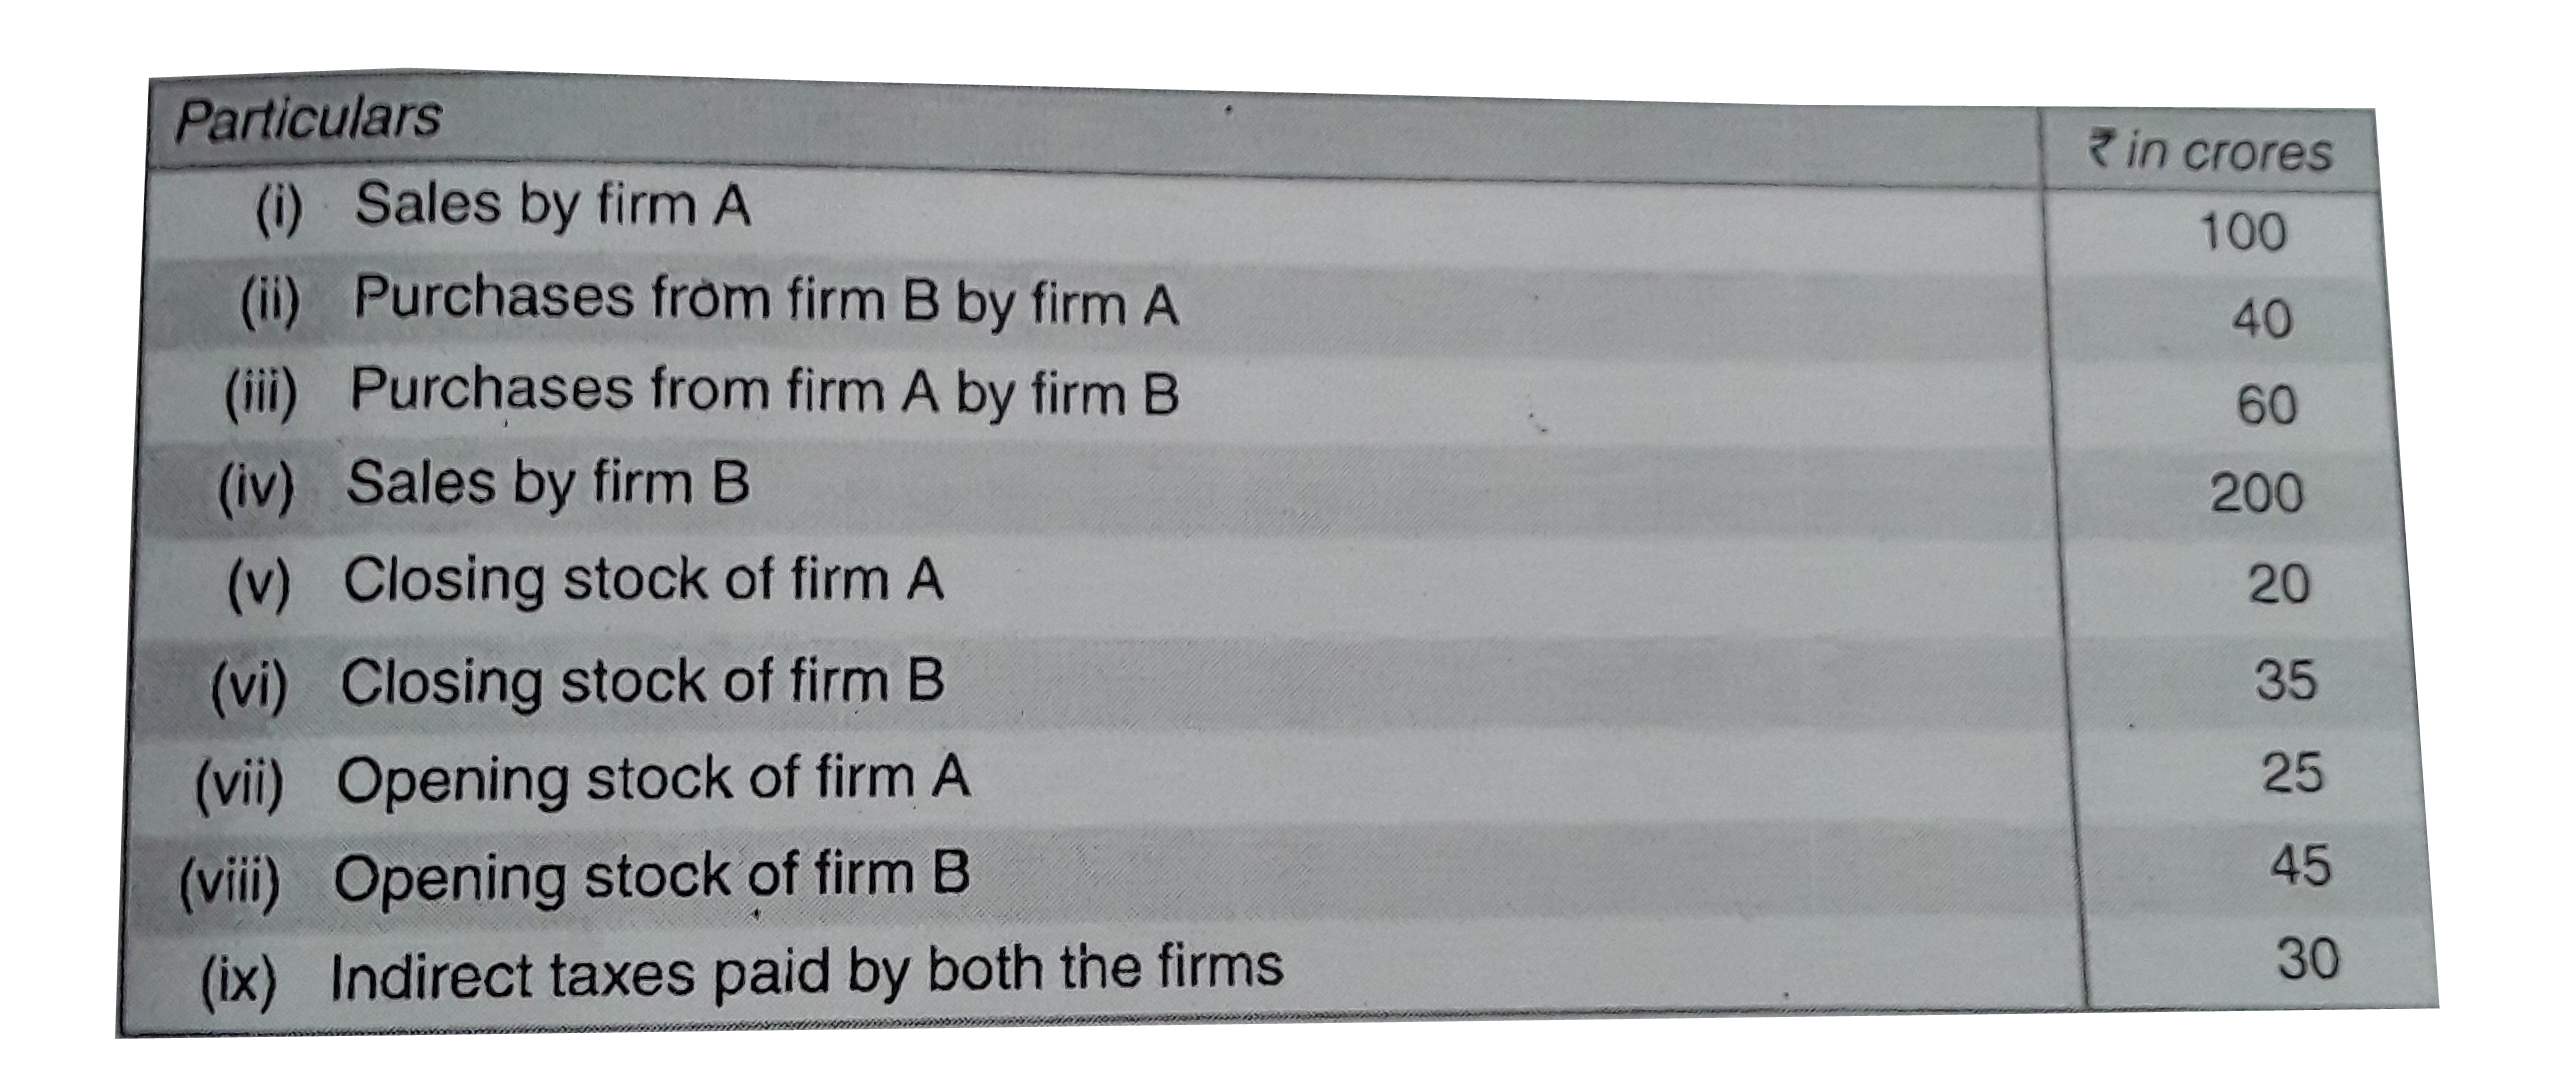 Calculate Value added by firm A and firm B.